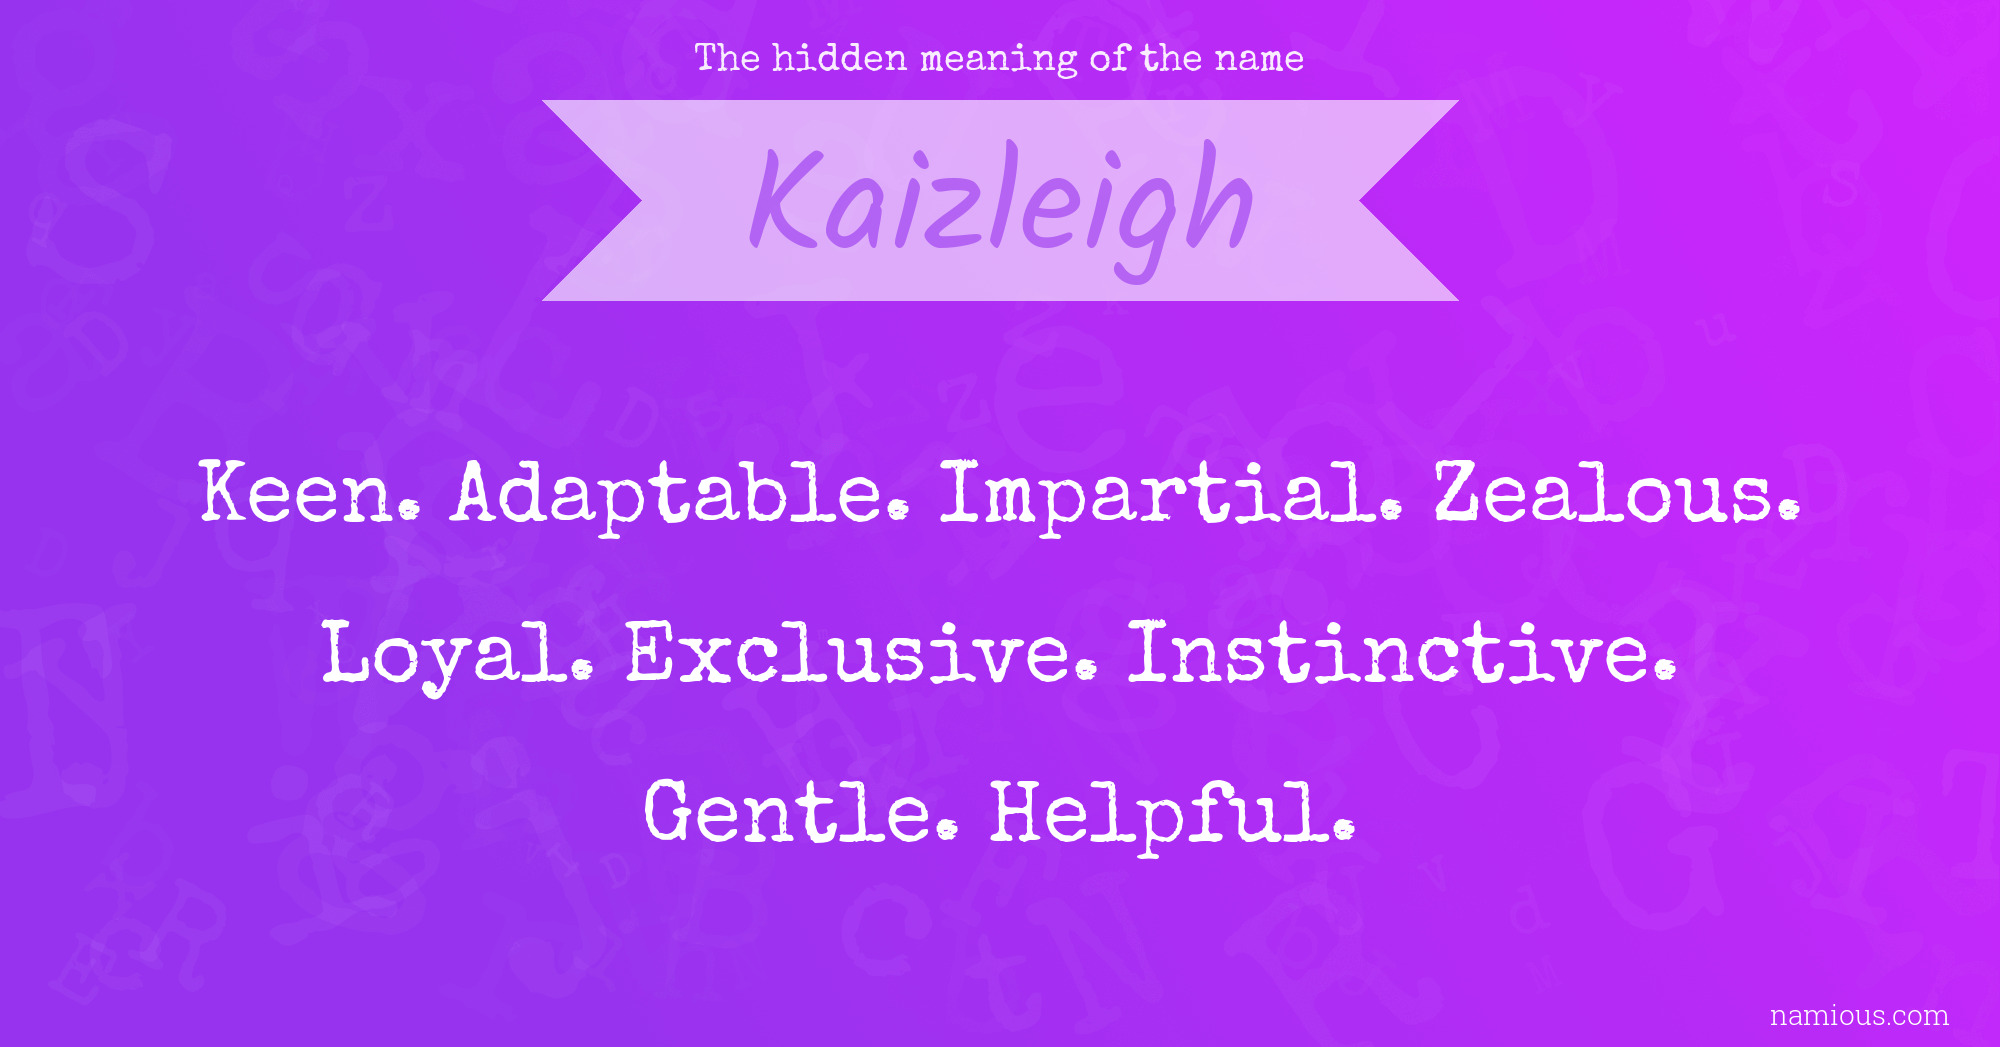 The hidden meaning of the name Kaizleigh